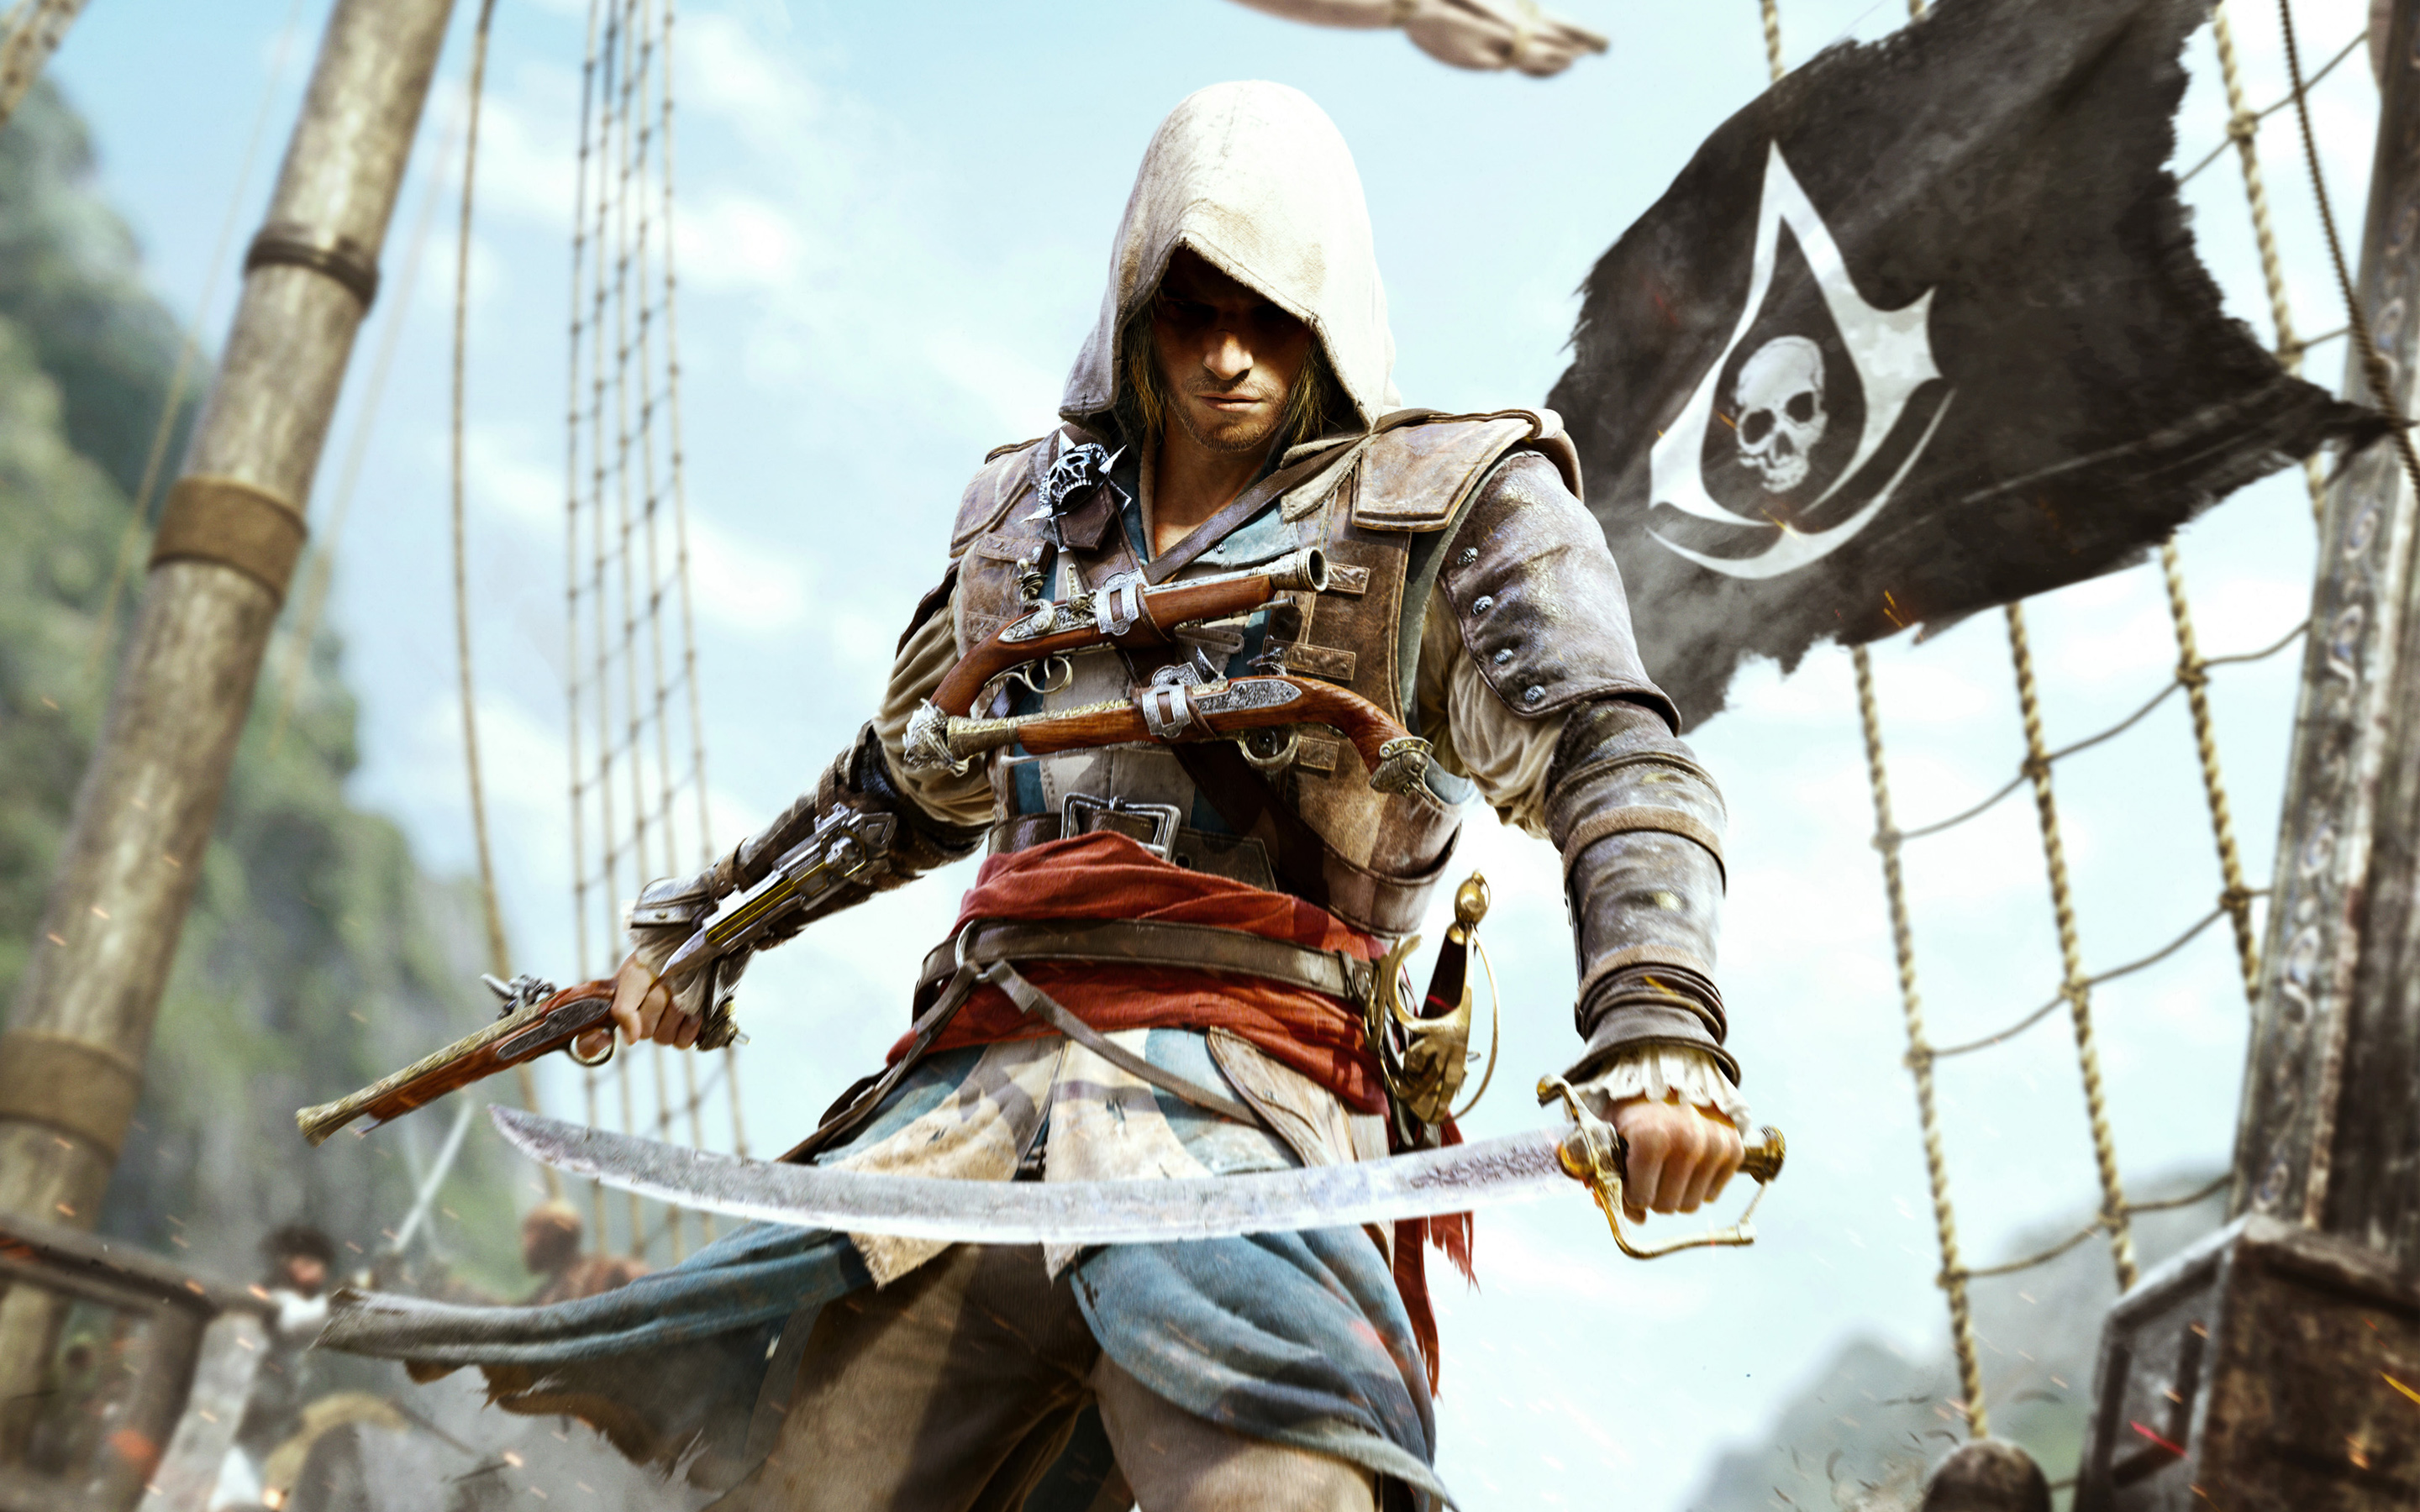 Assissin's creed iv review